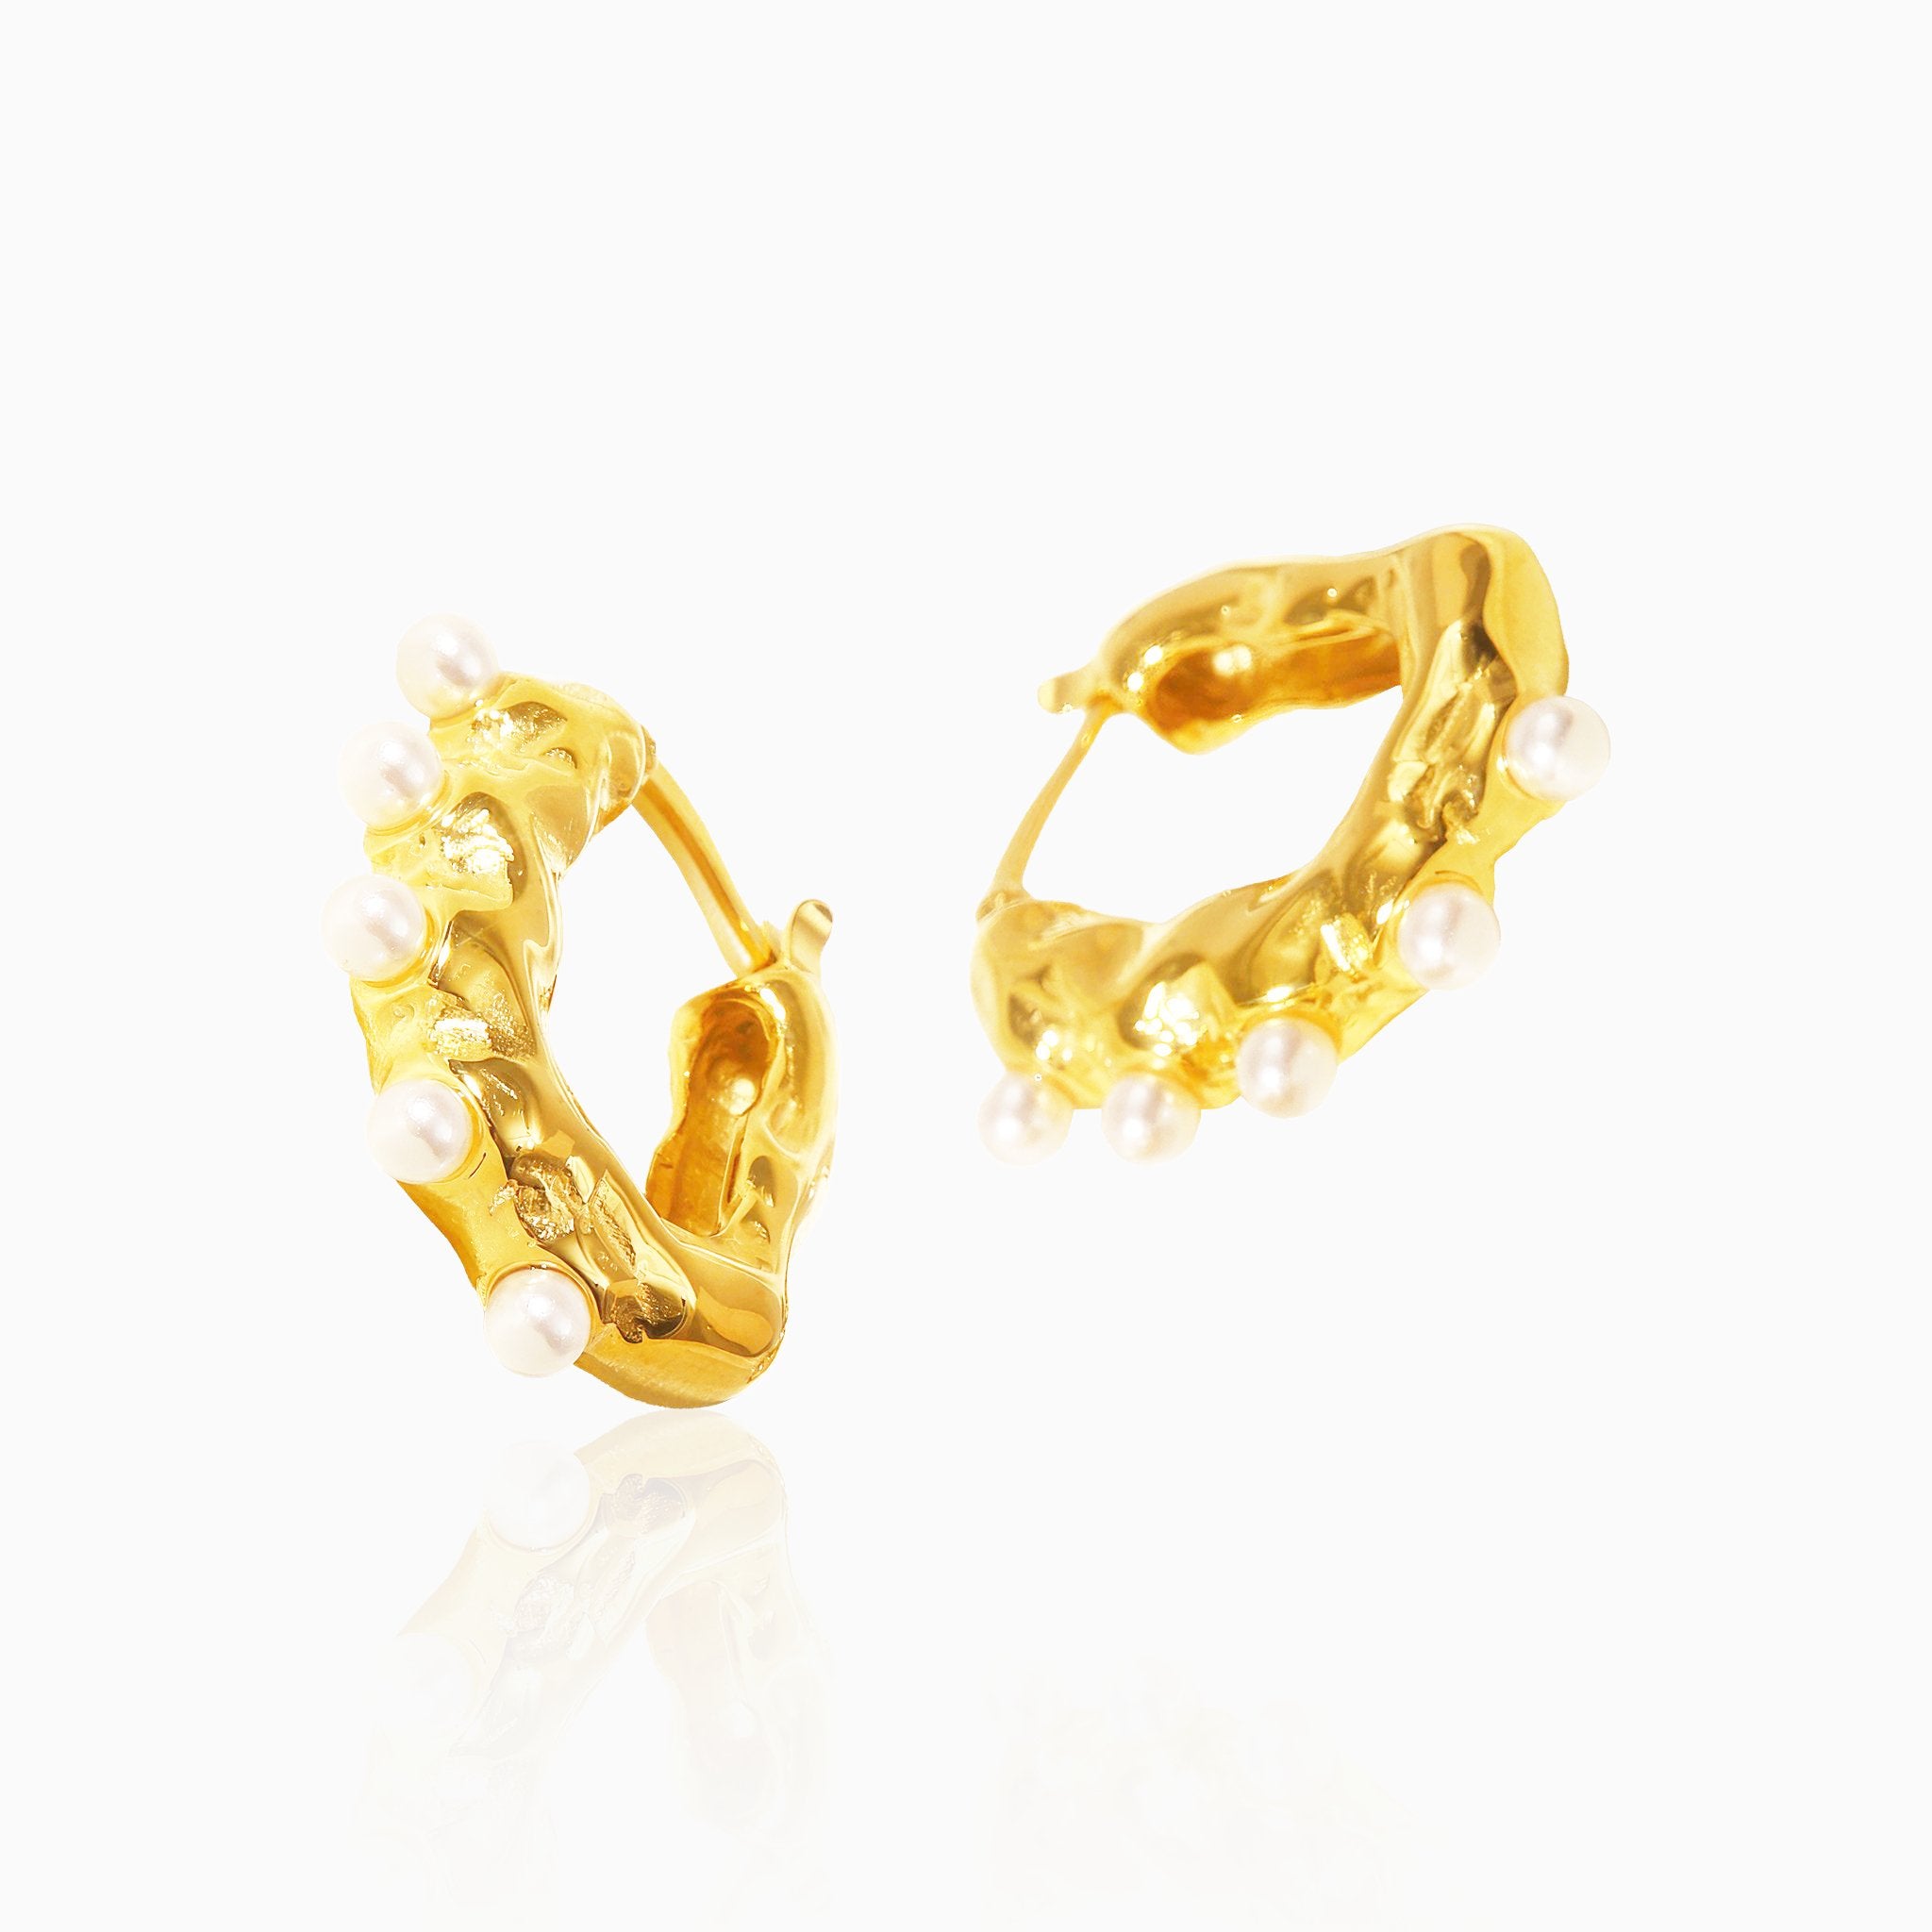 Irregular Wave Texture Pearl Earrings - Nobbier - Earrings - 18K Gold And Titanium PVD Coated Jewelry